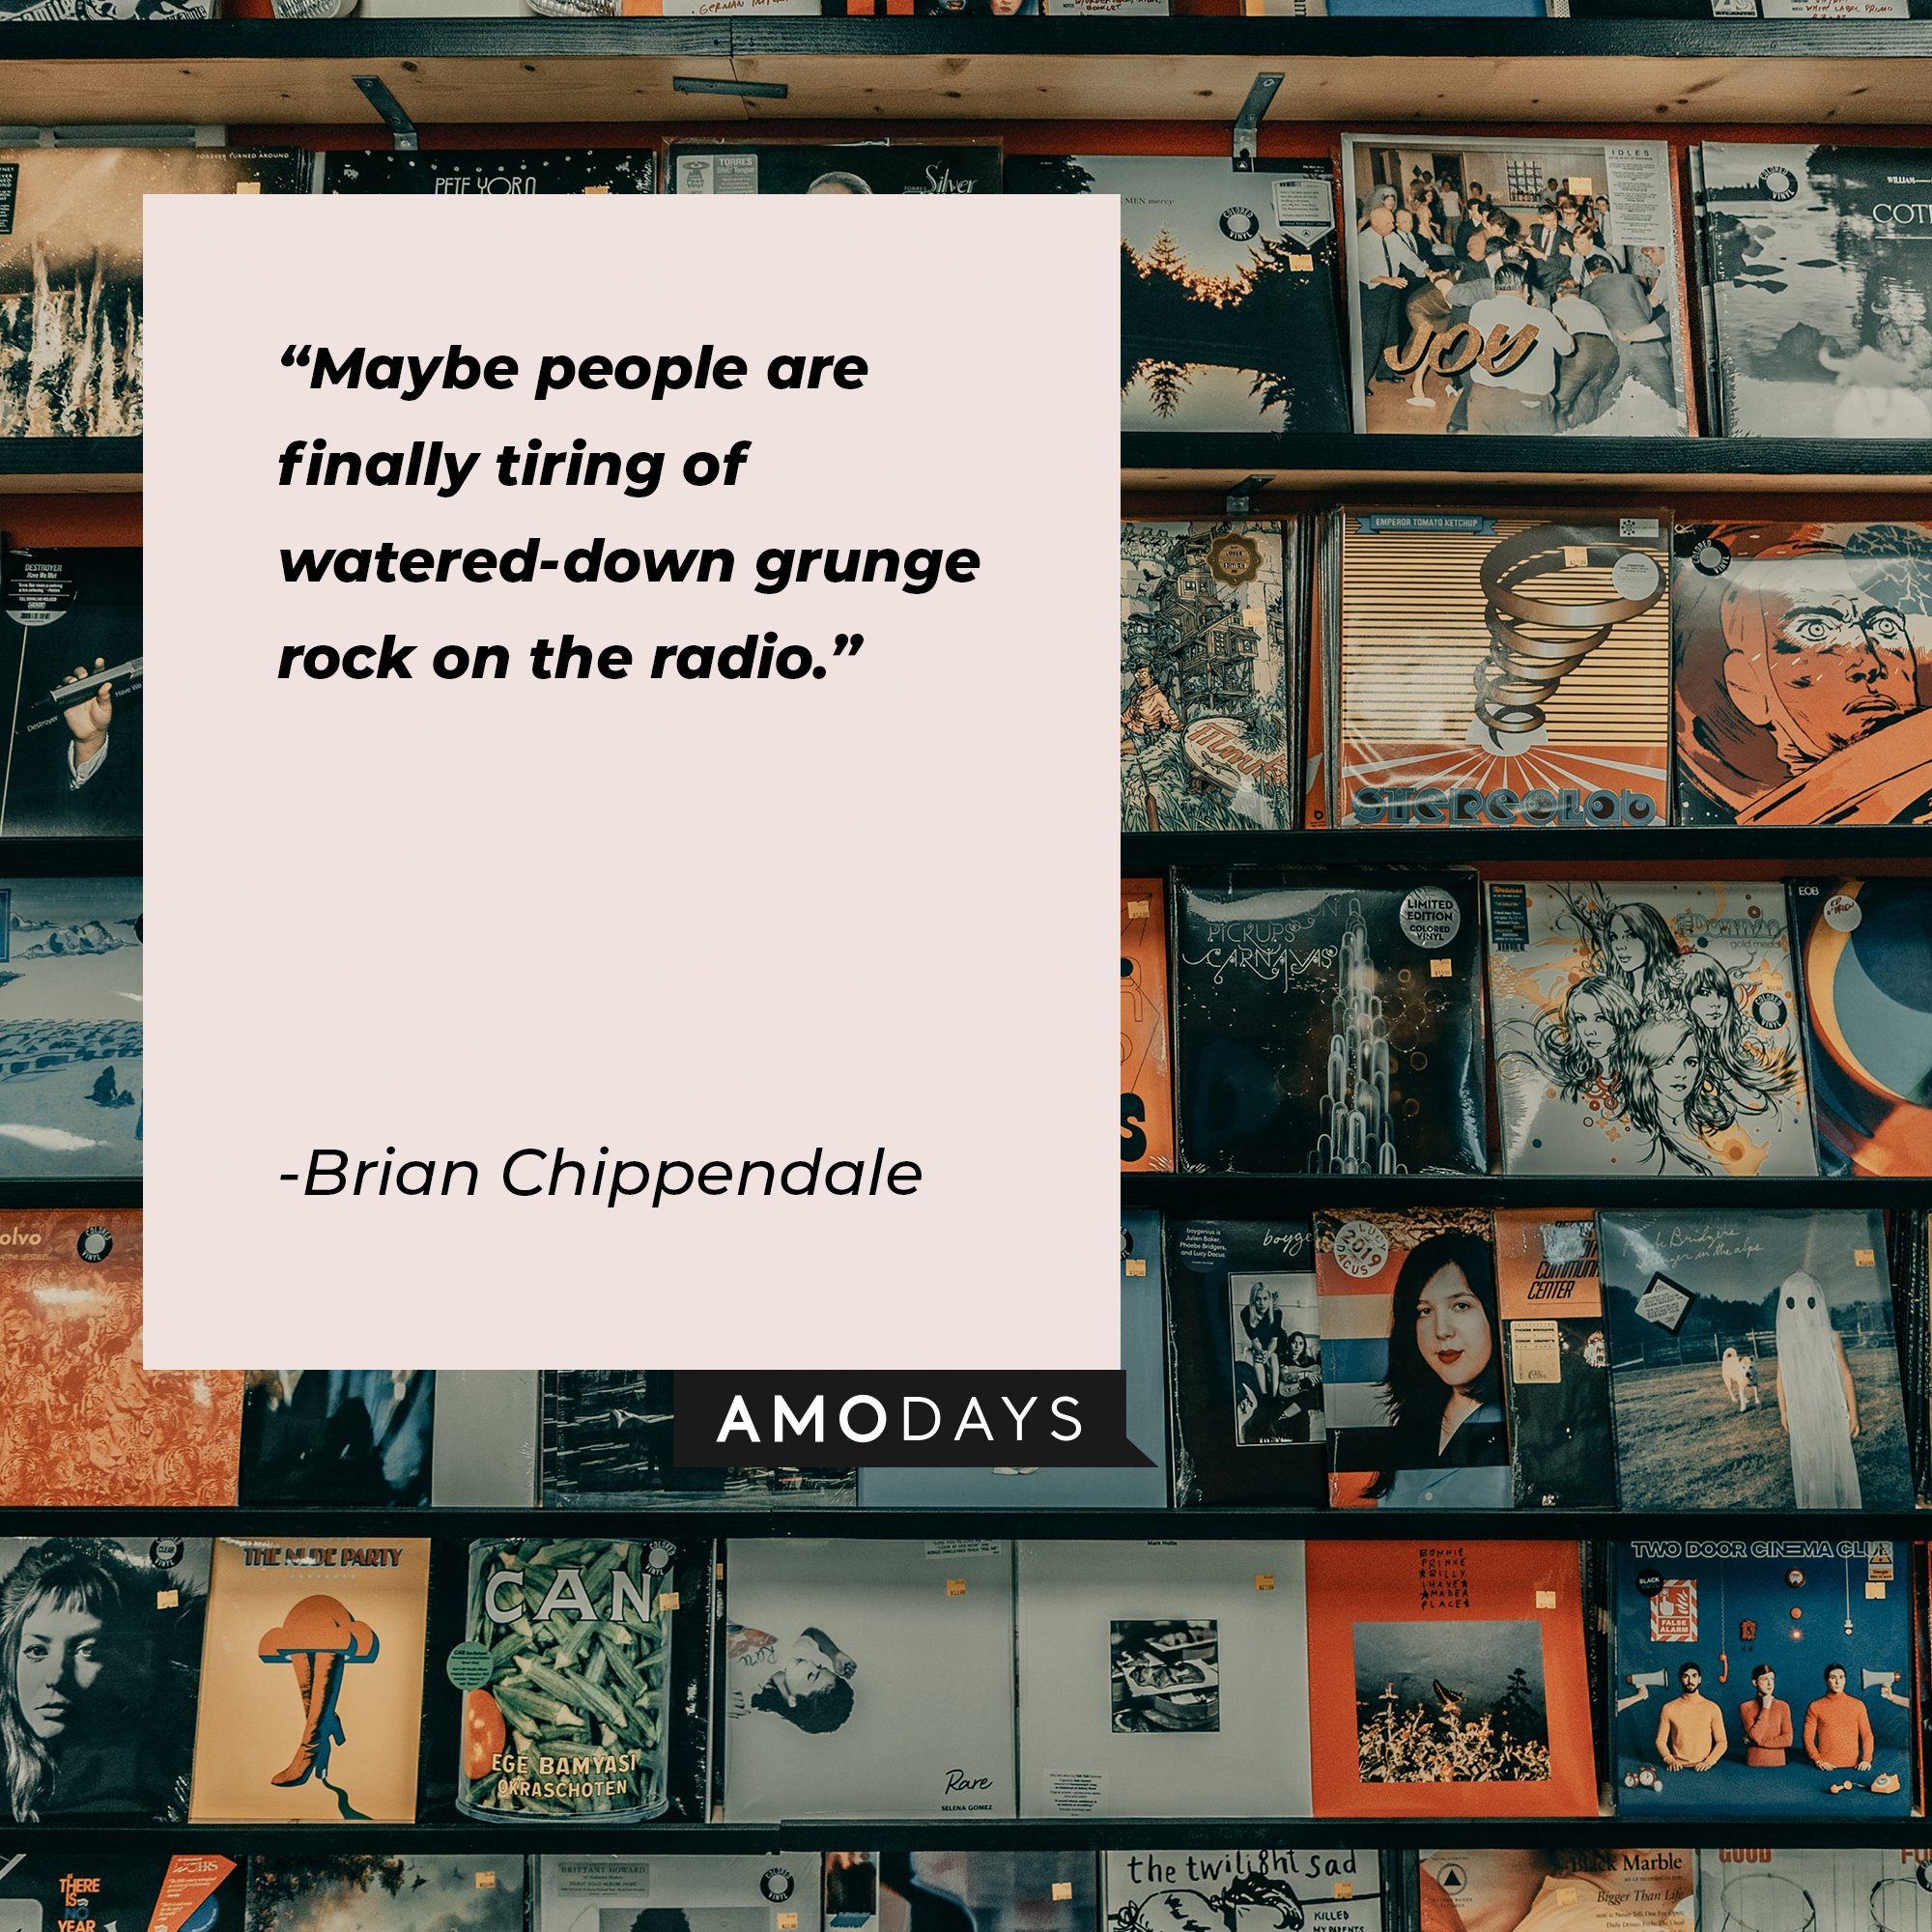 Brian Chippendale’s quote: "Maybe people are finally tiring of watered-down grunge rock on the radio." | Image: AmoDays